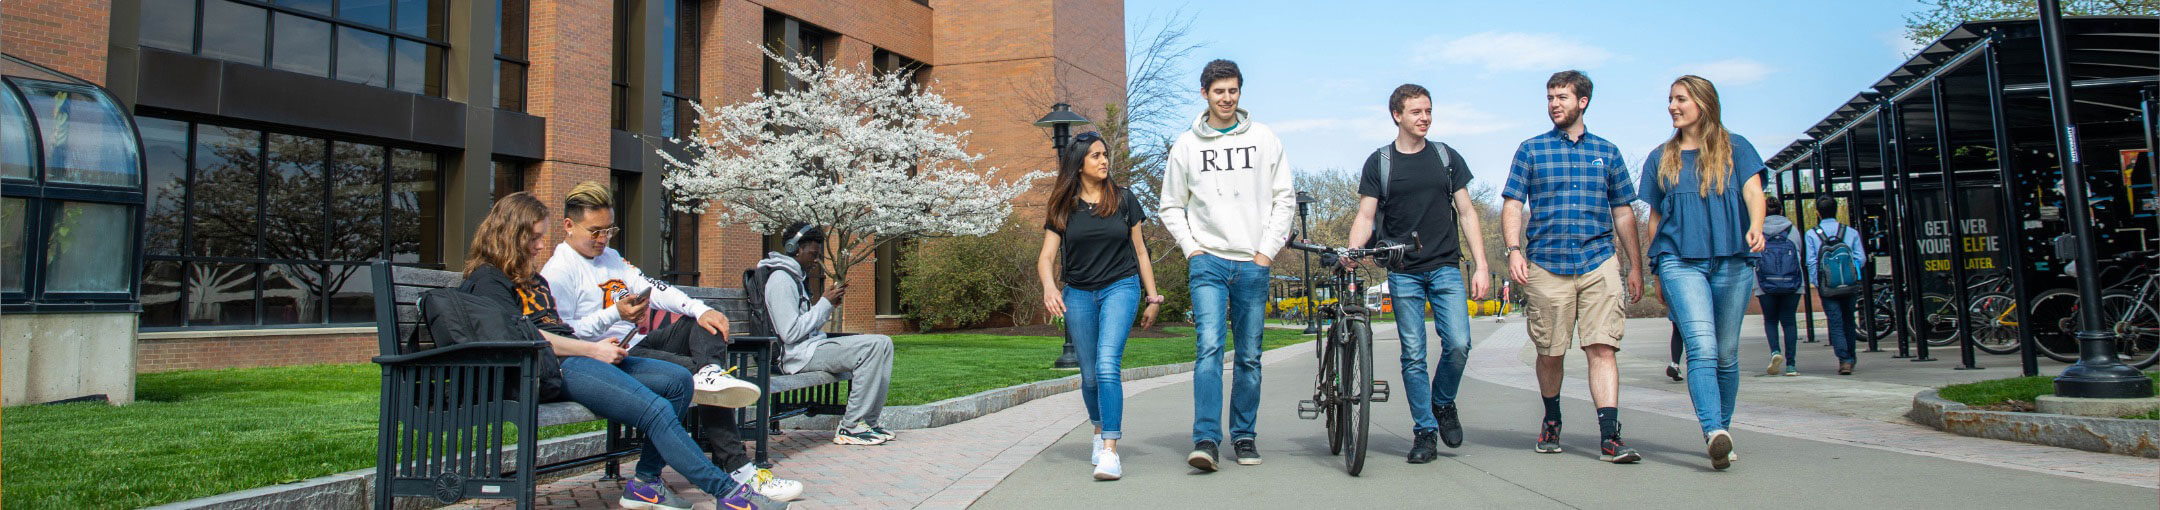 A group of five RIT students walking on campus.